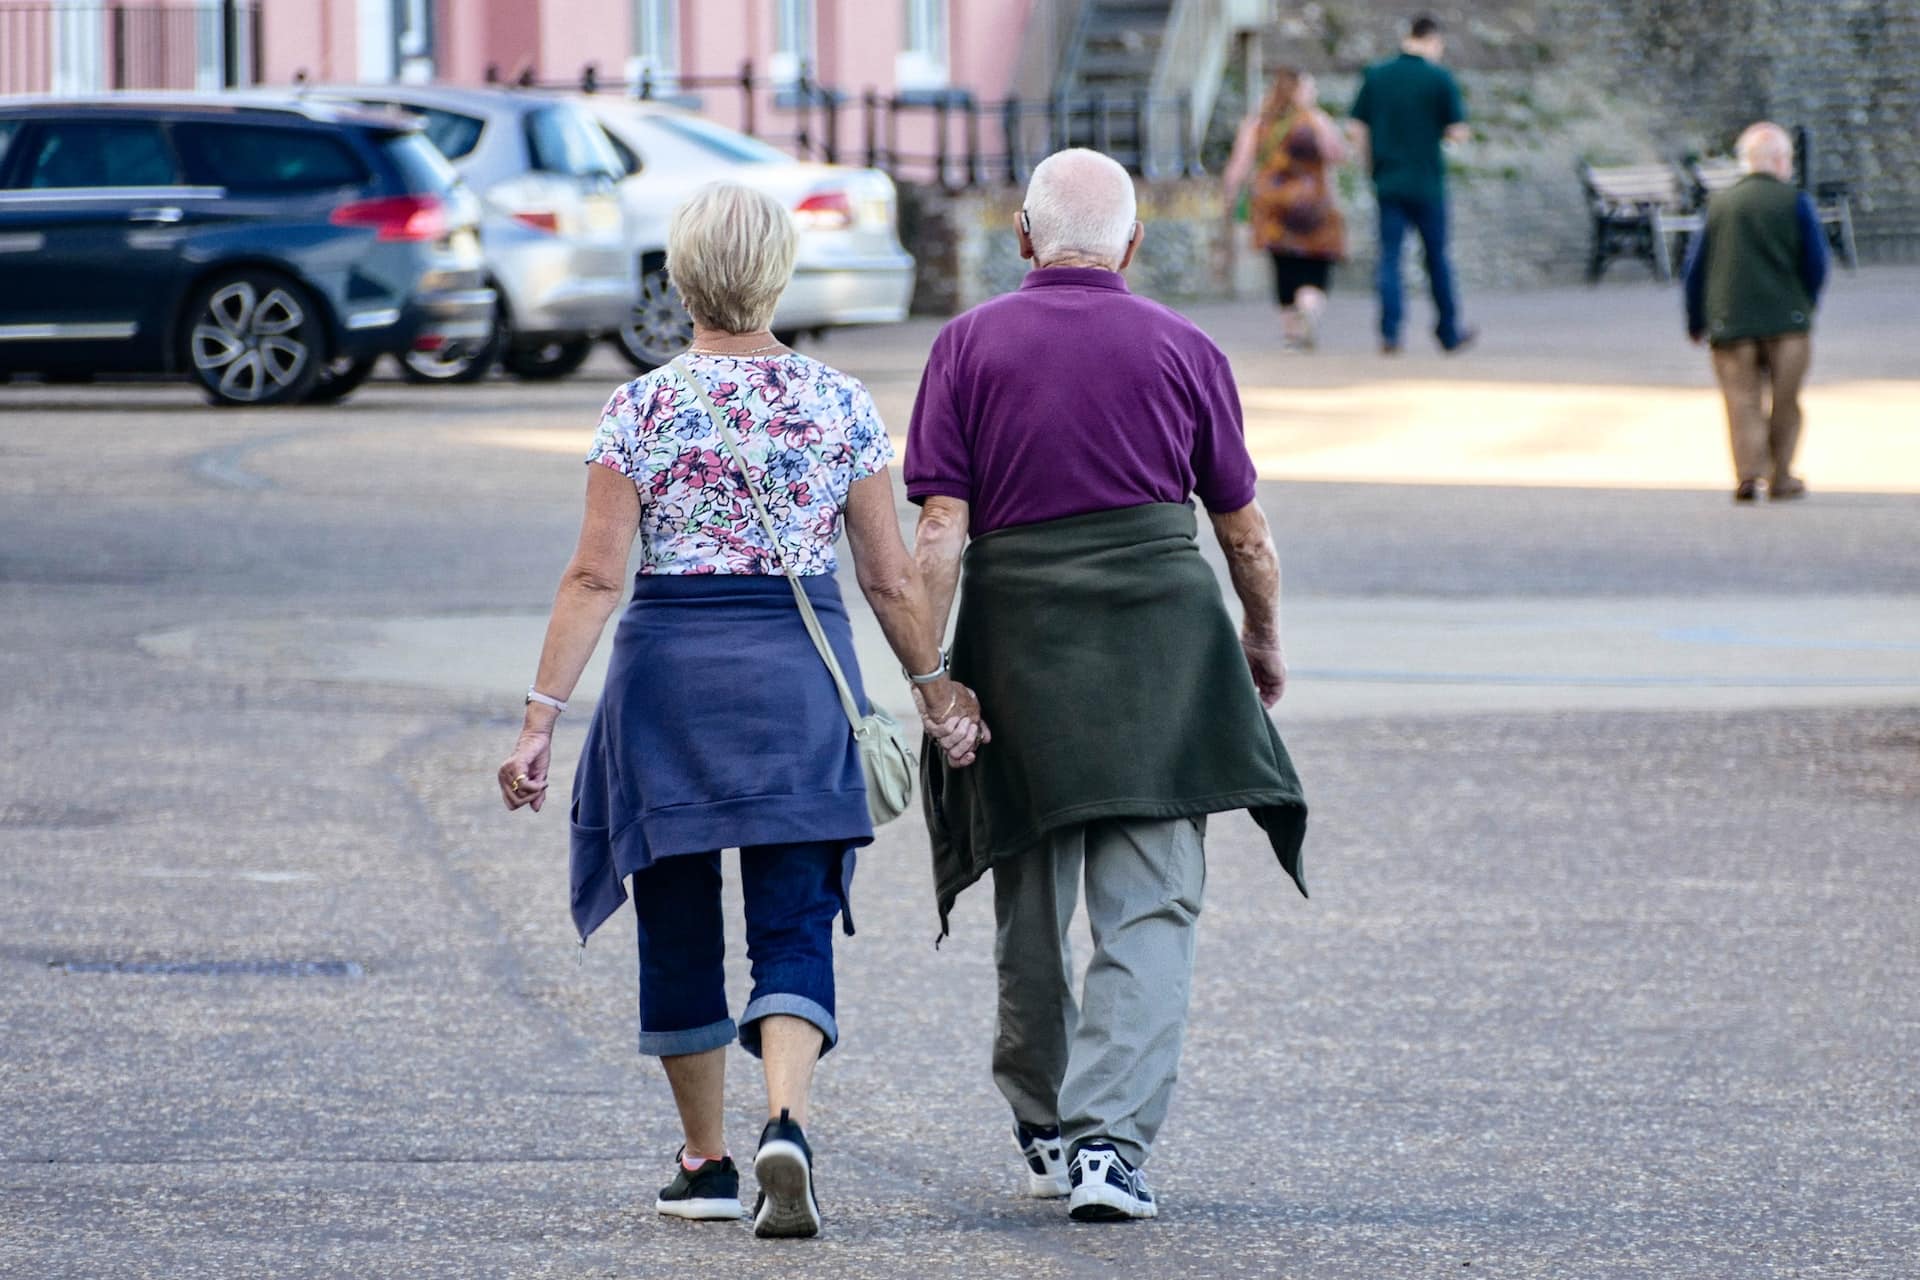 man and woman walking in street holding hands